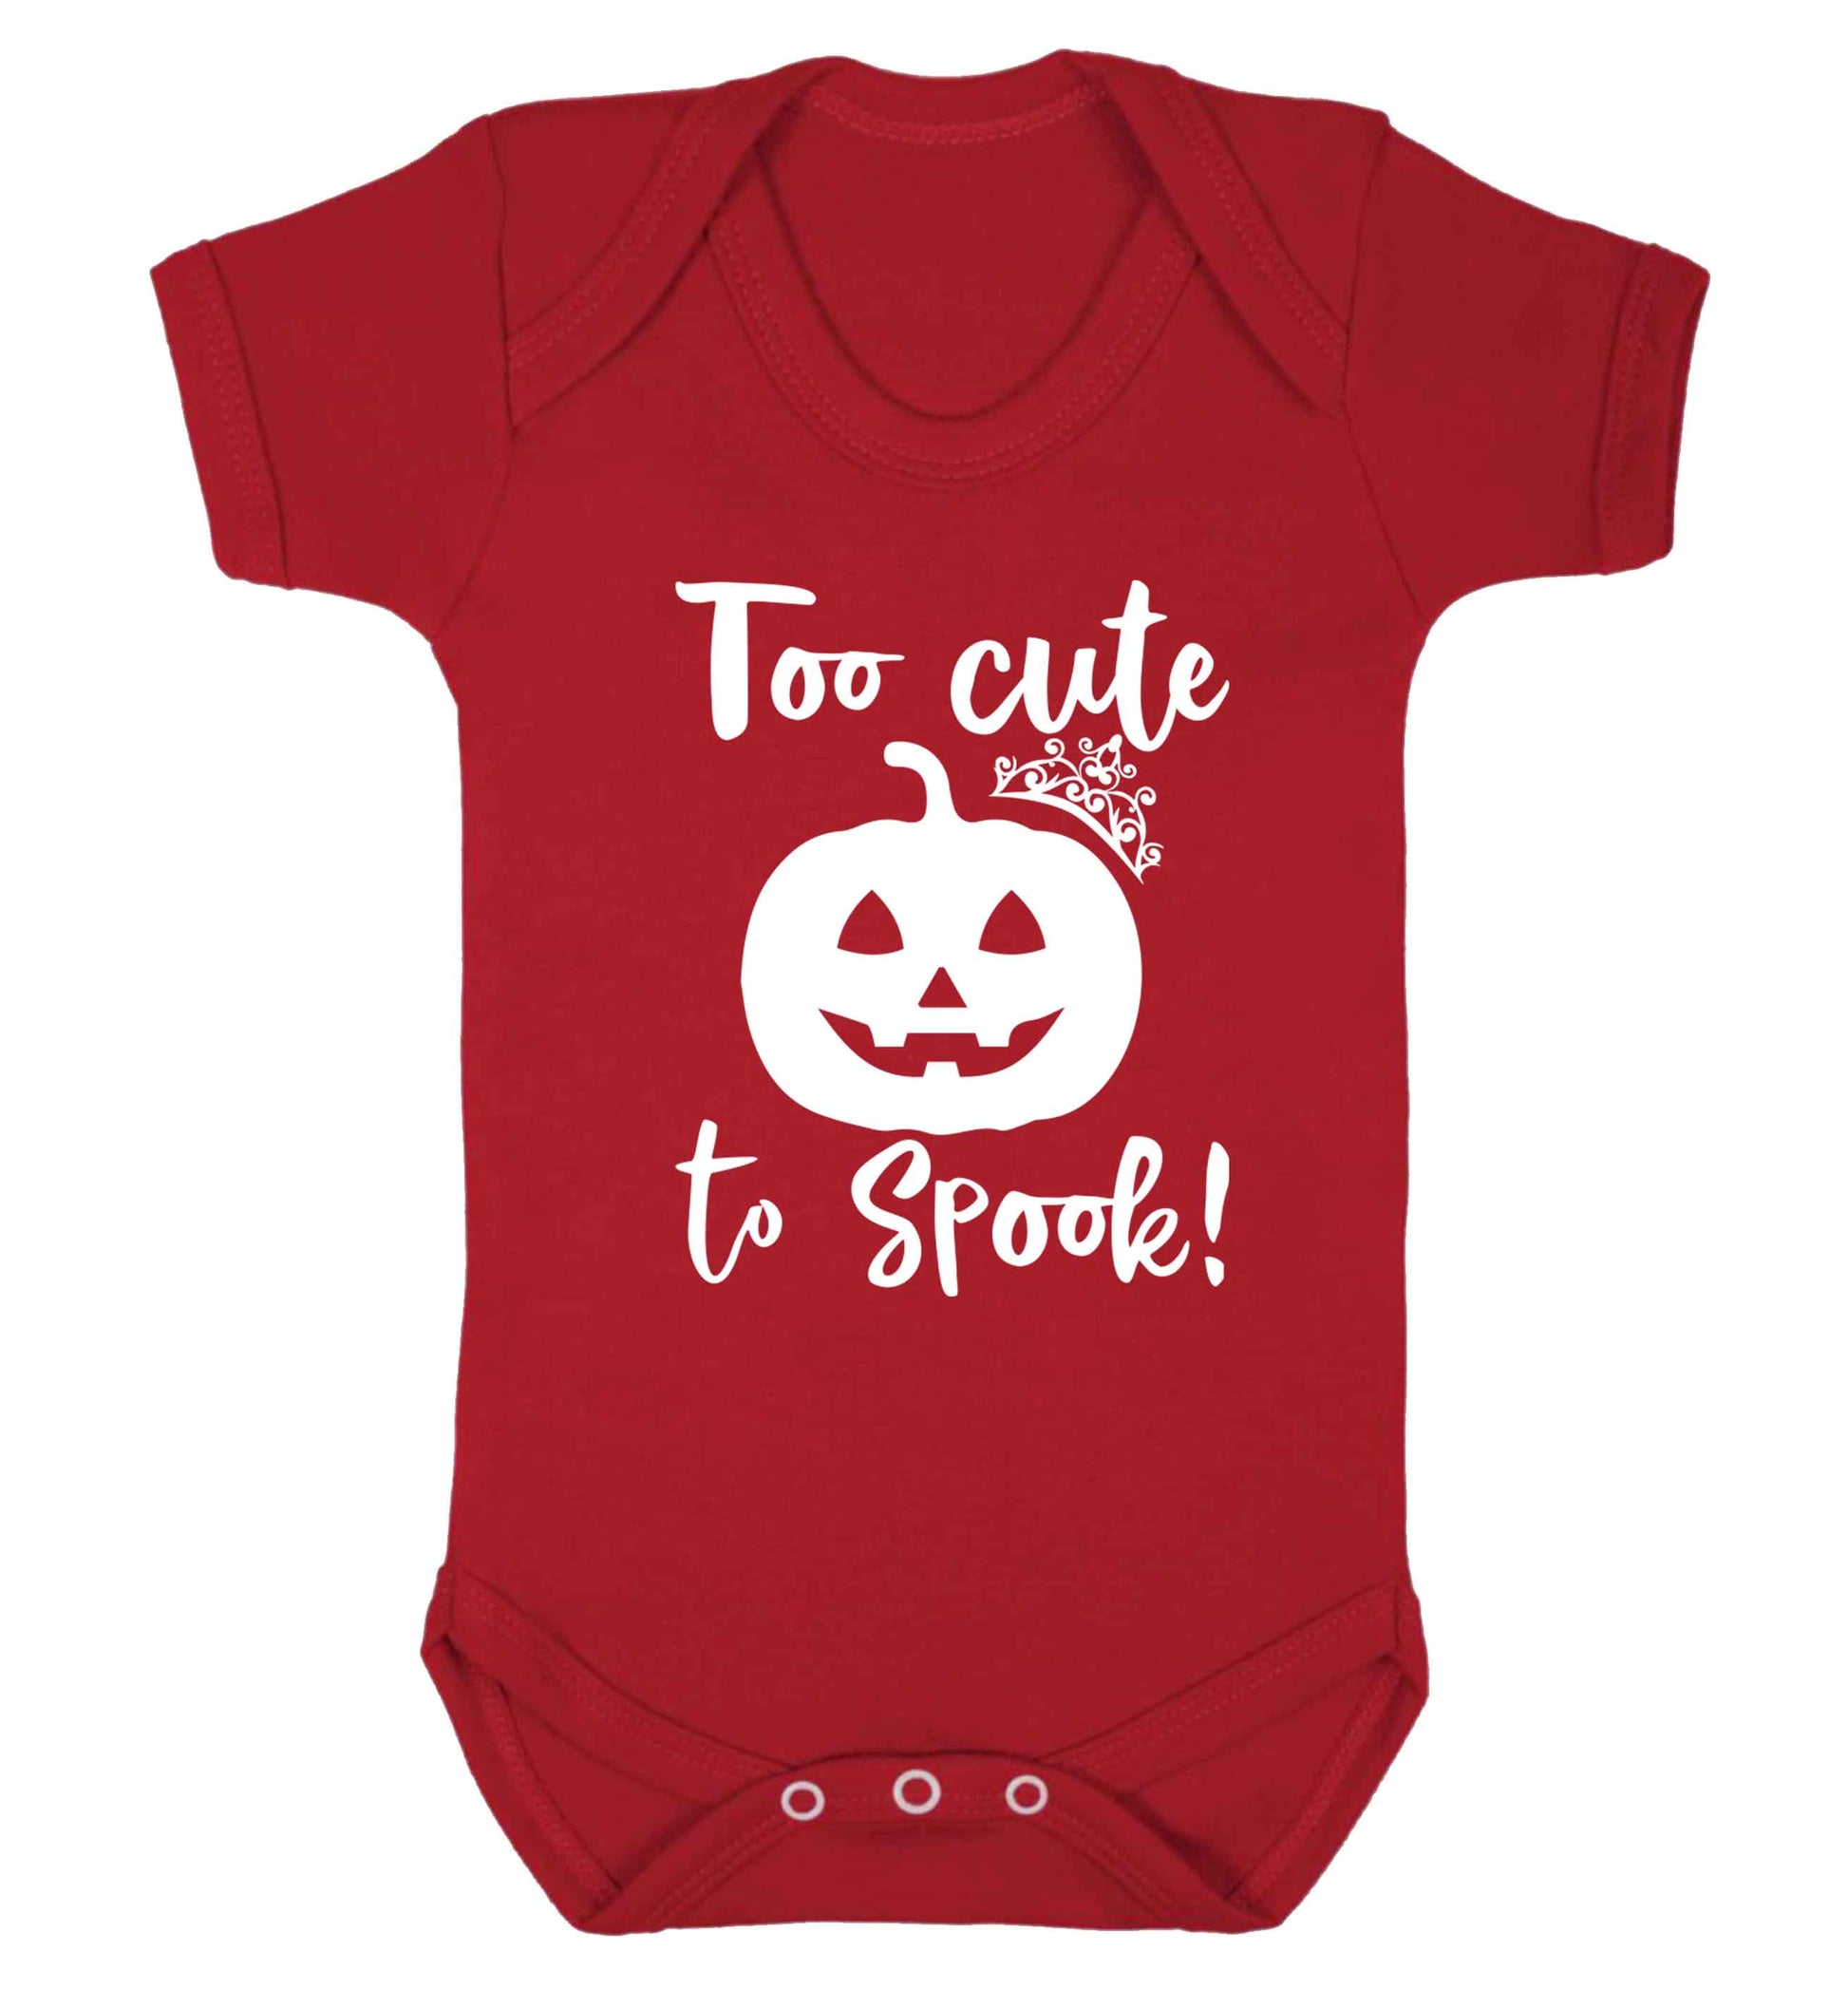 Too cute to spook! Baby Vest red 18-24 months